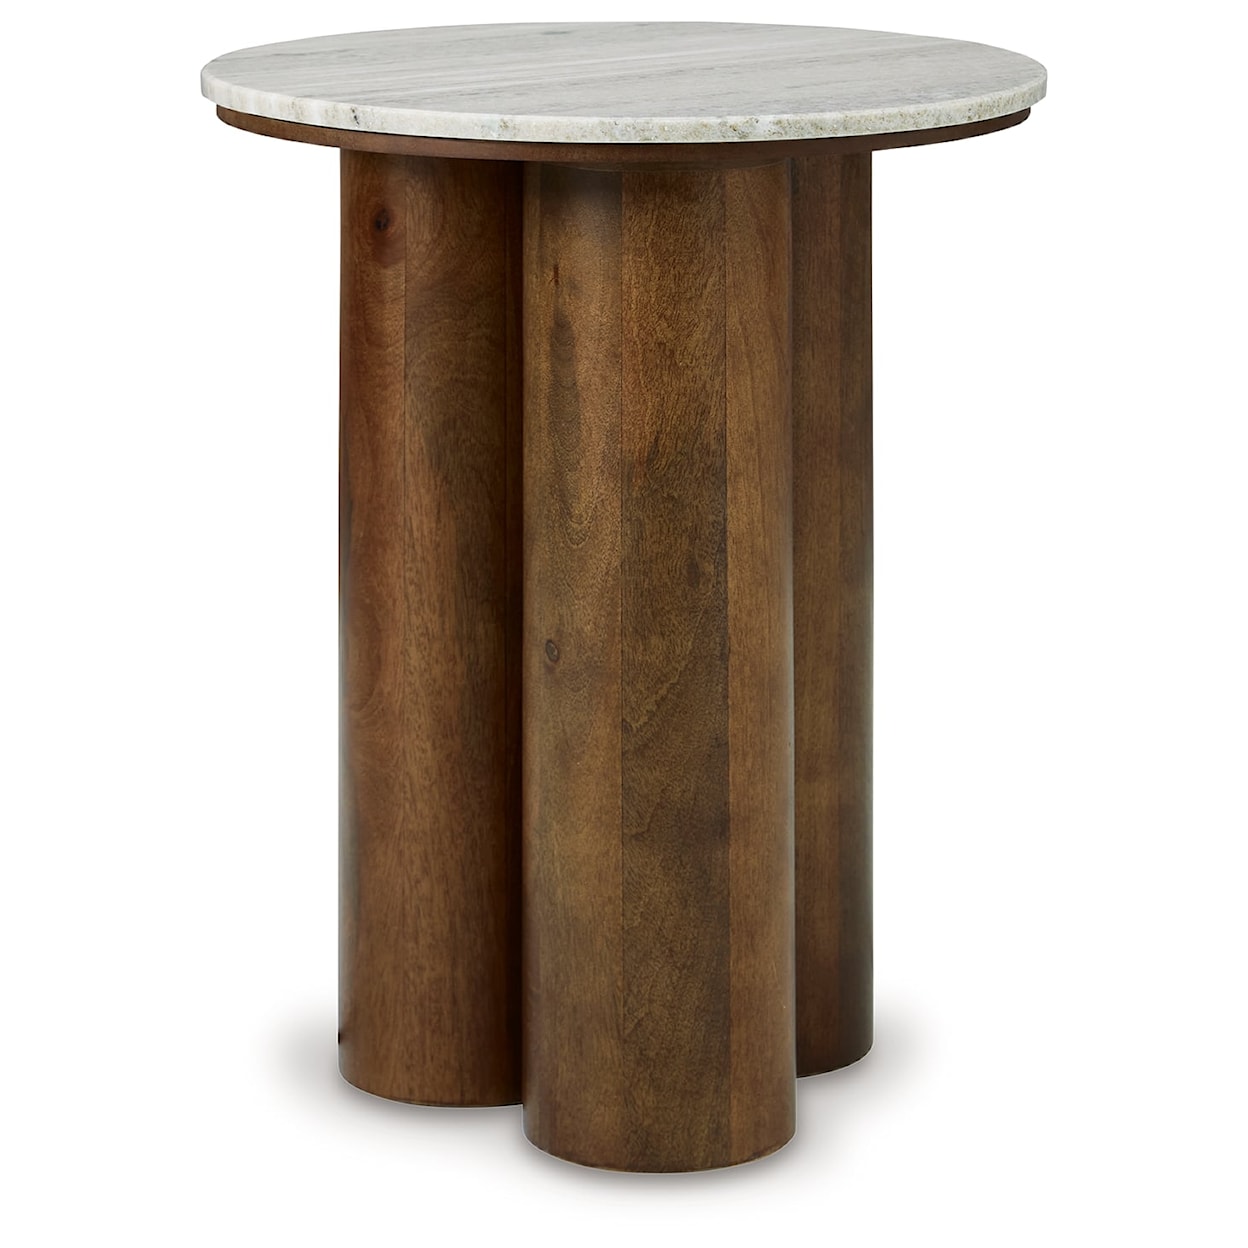 StyleLine Henfield Accent Table